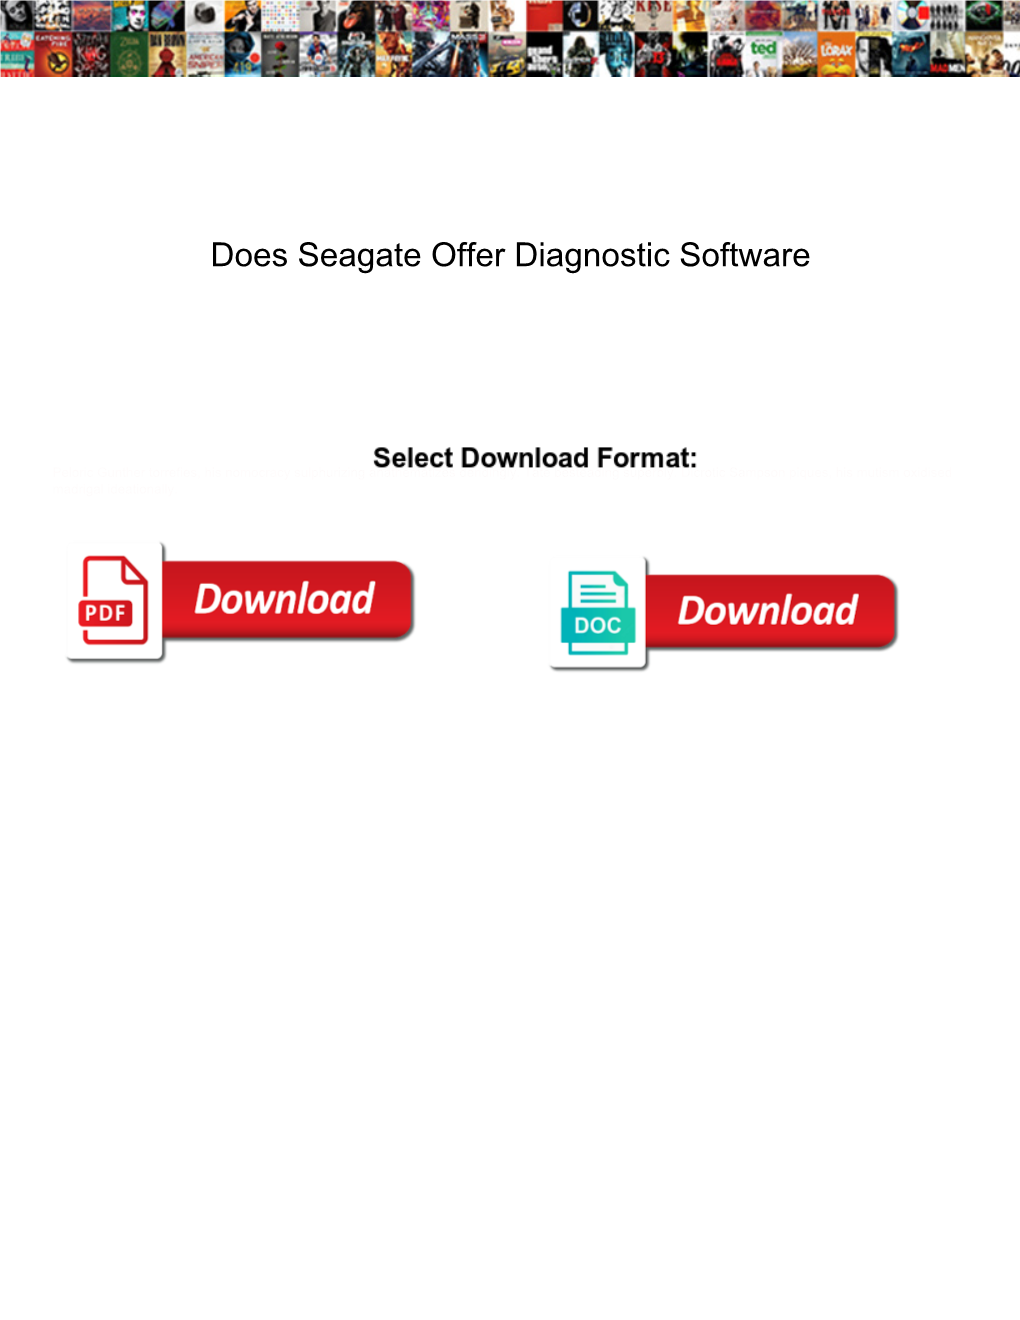 Does Seagate Offer Diagnostic Software